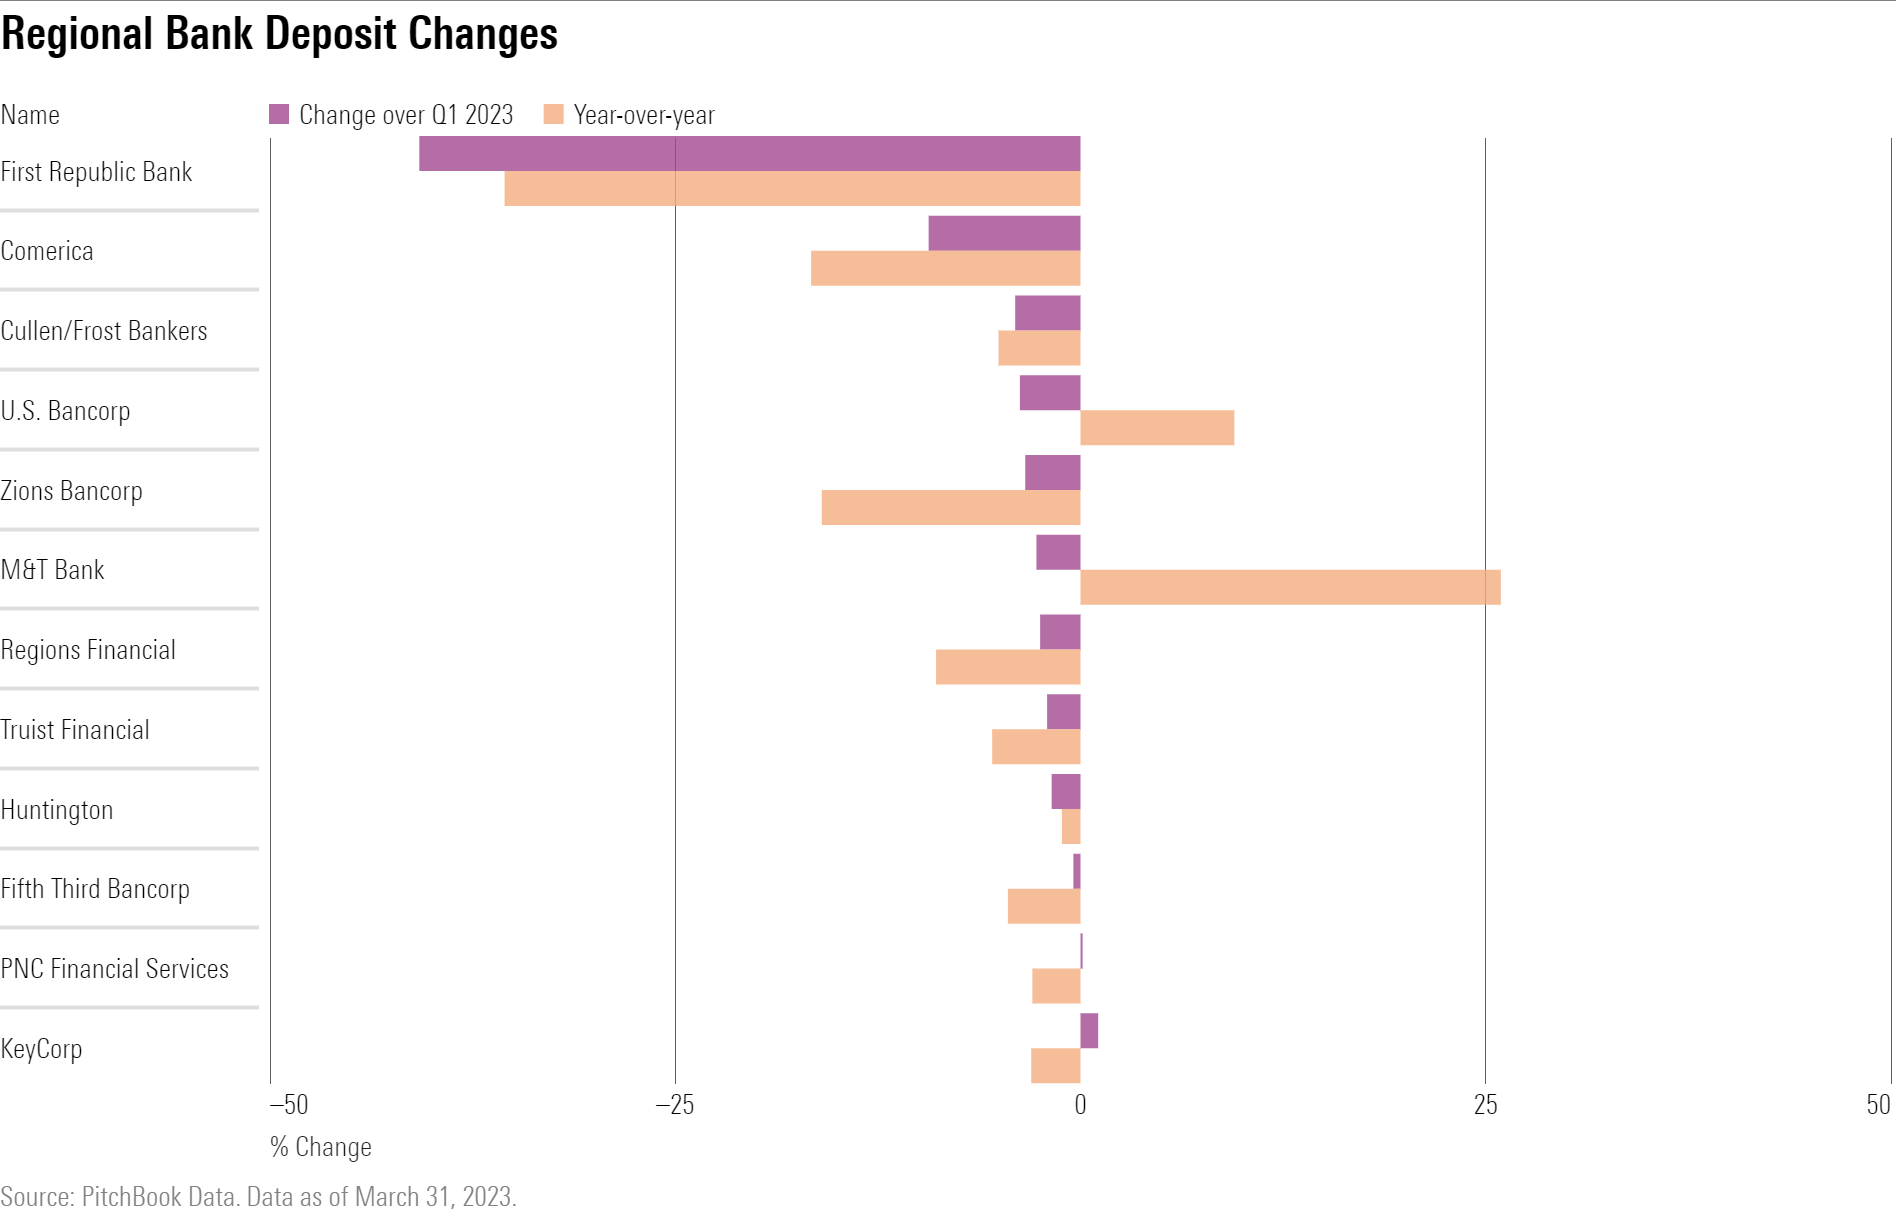 A bar chart showing year-over-year and sequential quarter changes in regional bank deposits.